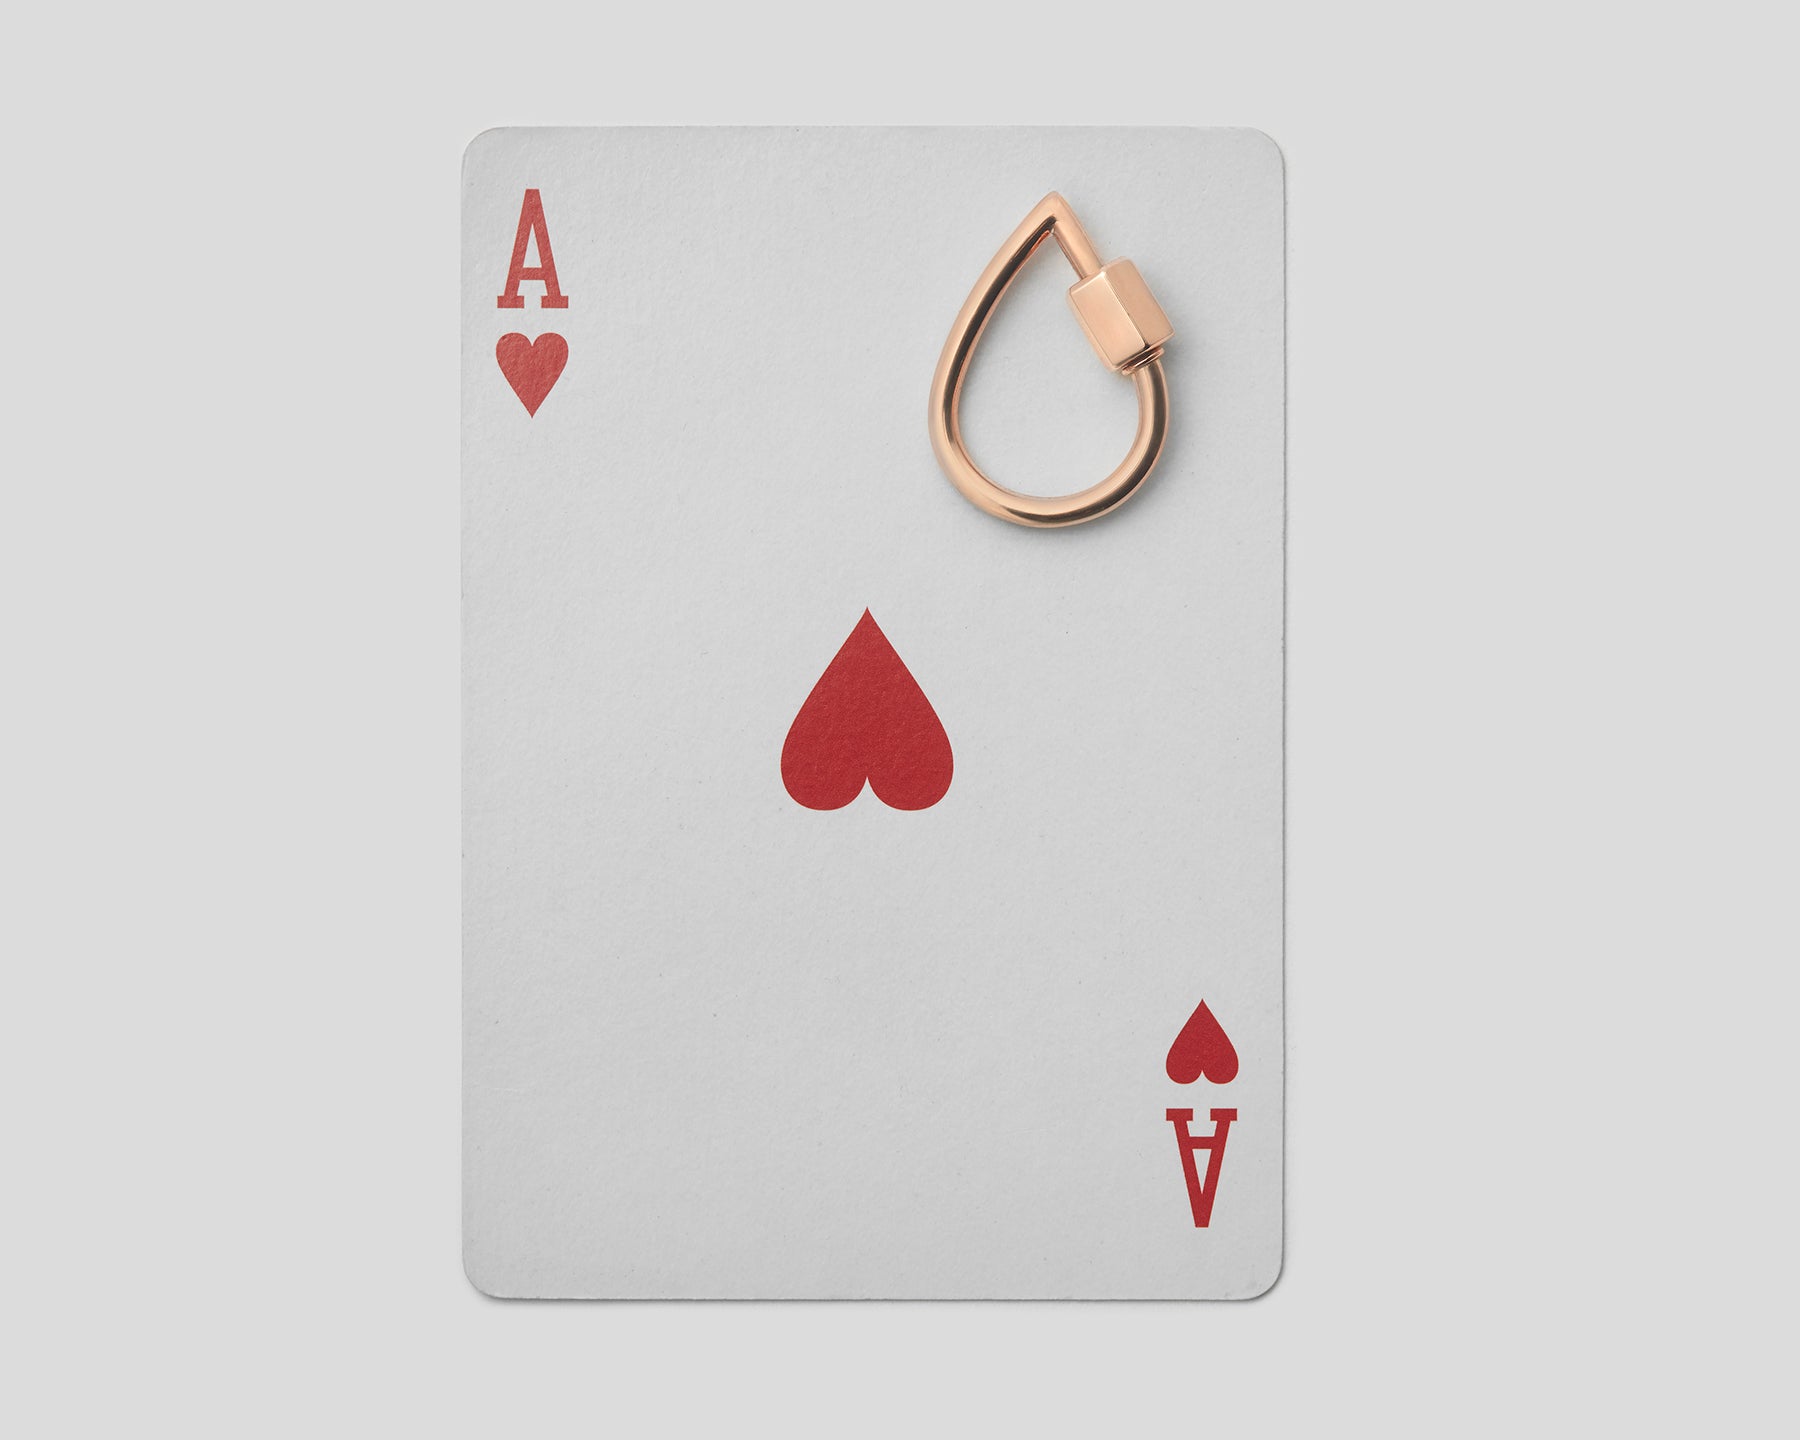 Small rose gold droplock on top of ace of hearts playing card